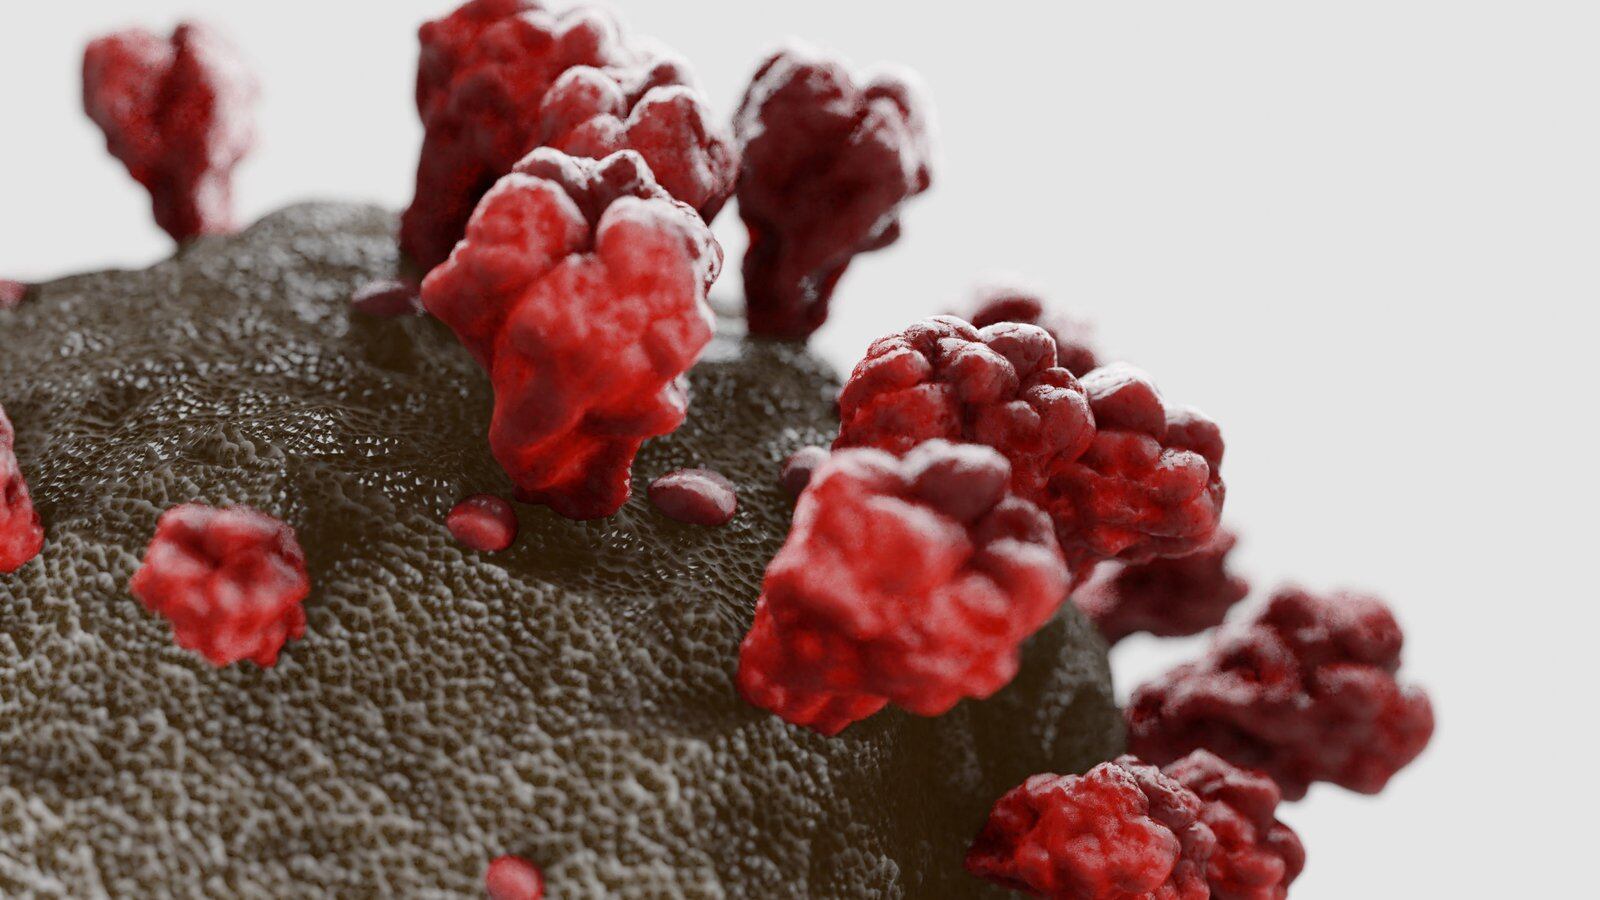 3D art based on microscope images of the coronavirus from the 2020 outbreak in Wuhan, China